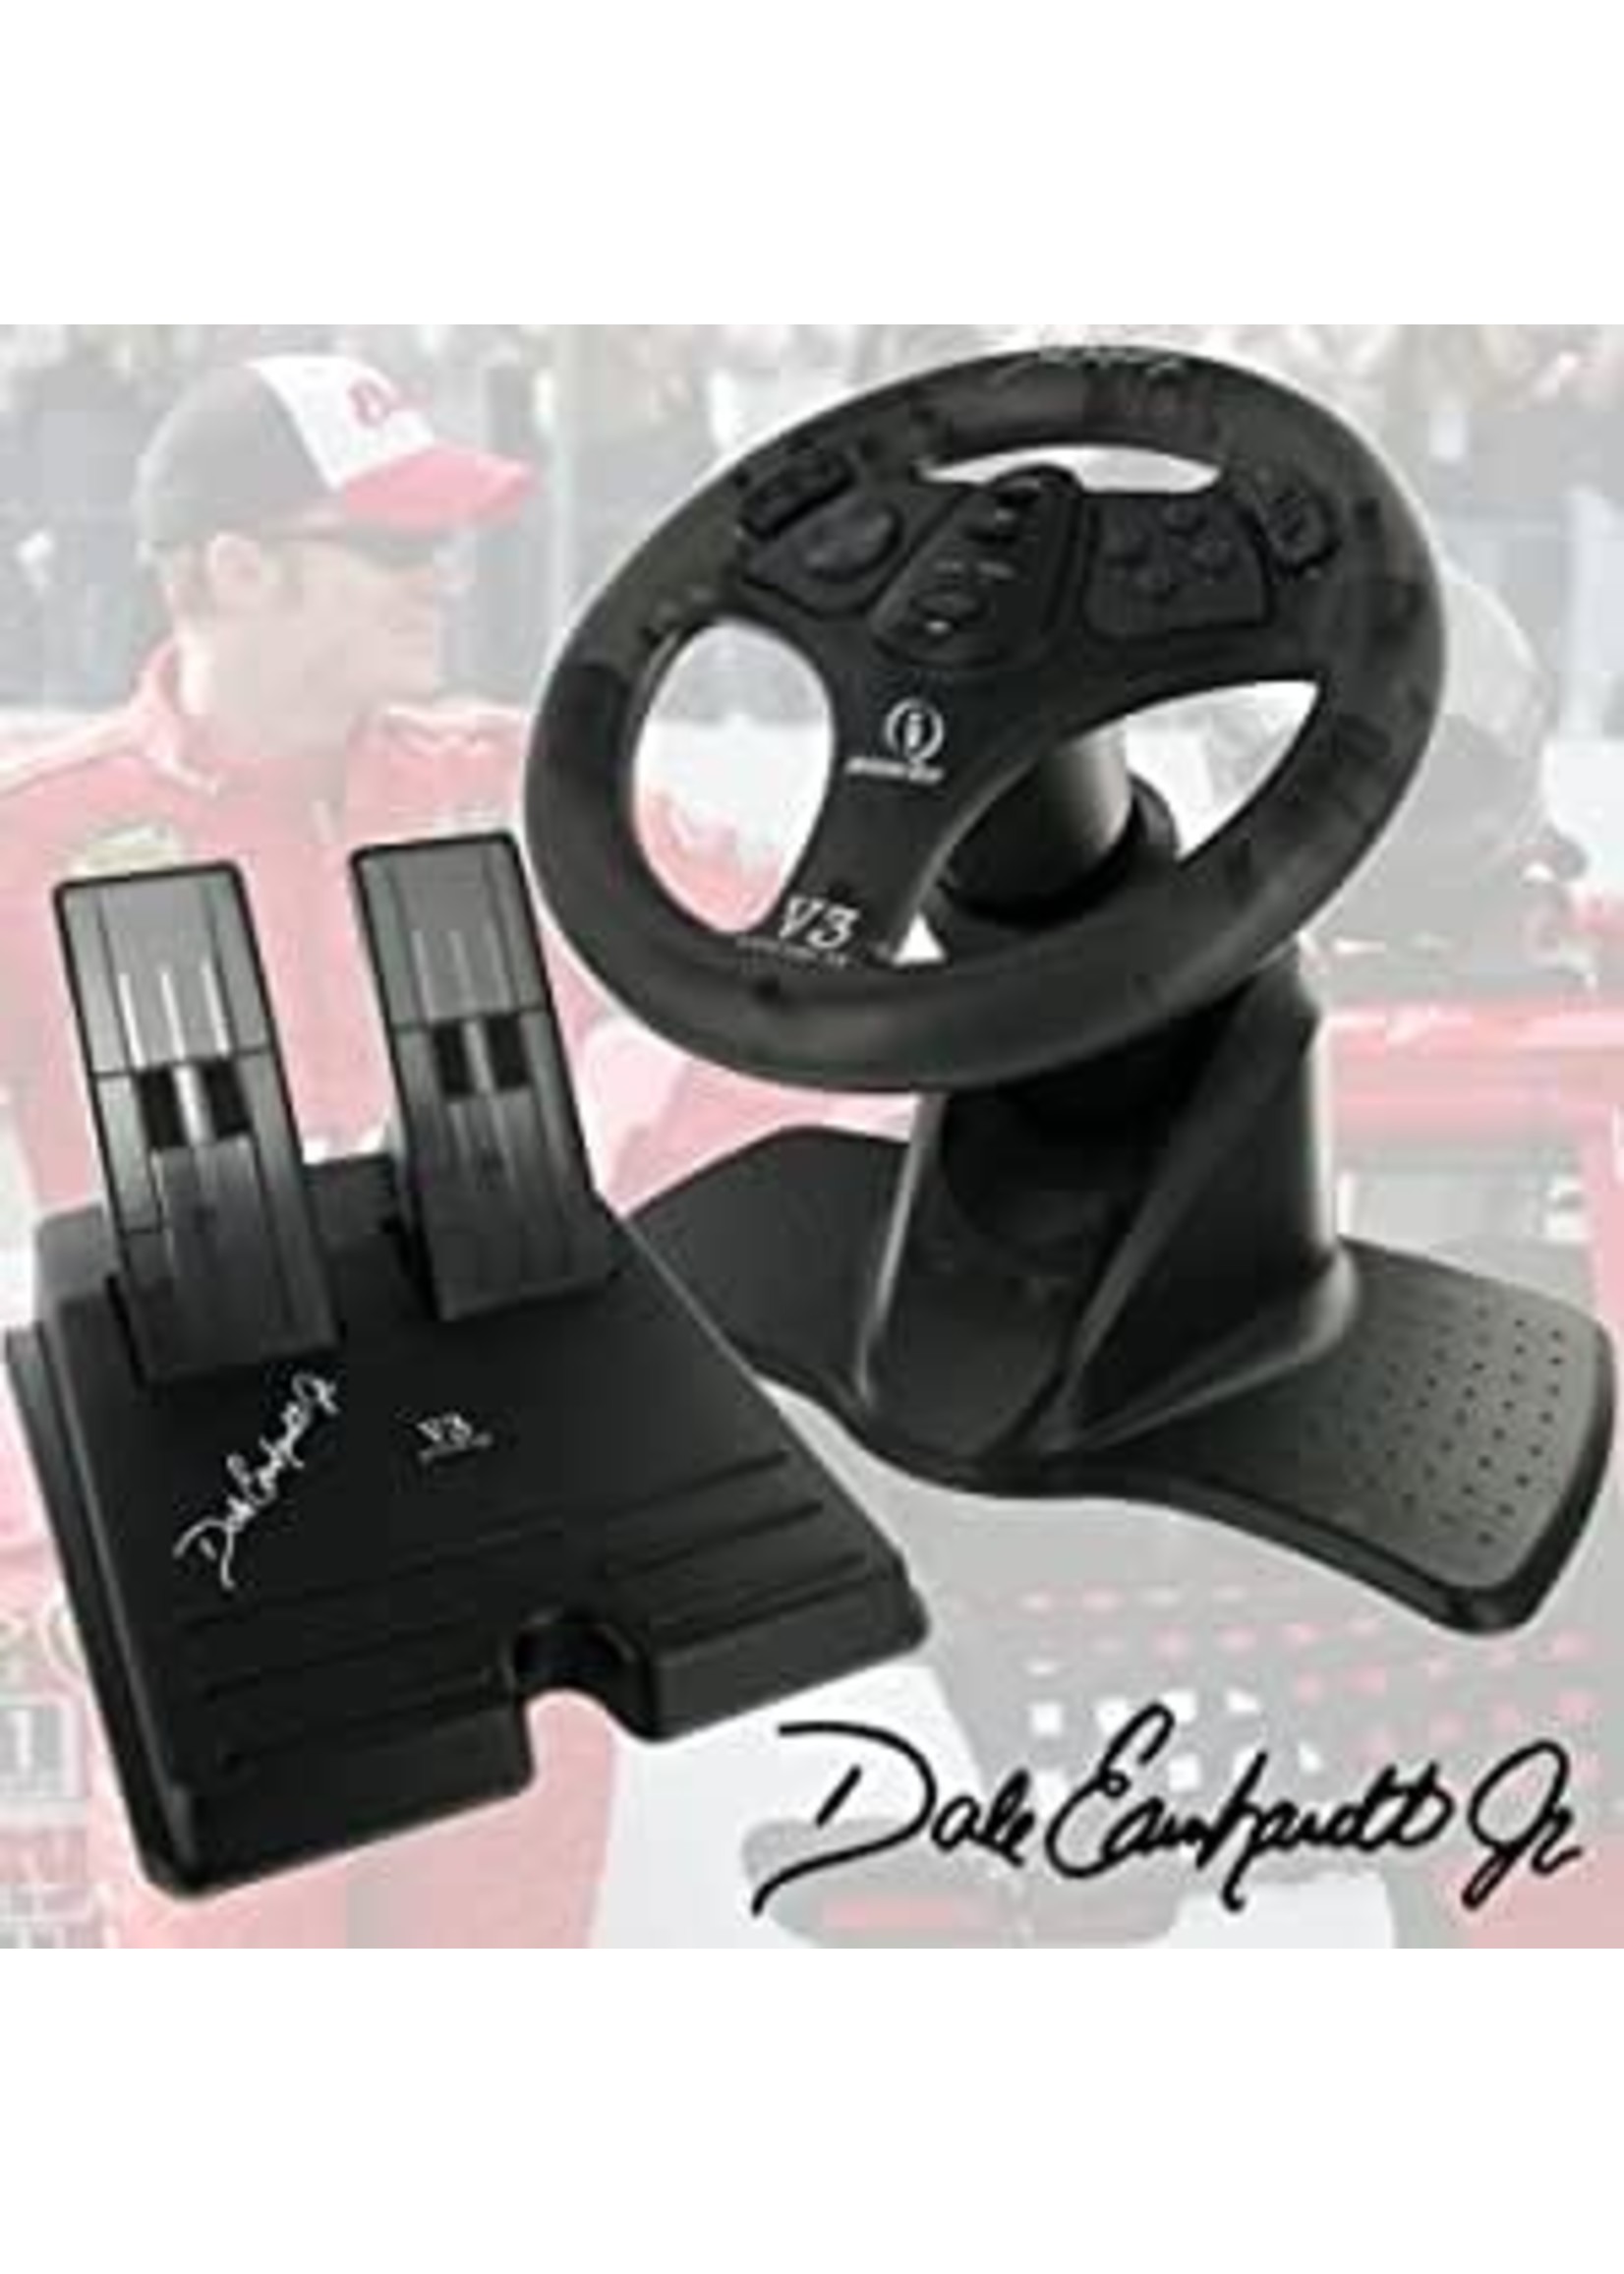 Dale Earnhardt Jr V3 Racing Wheel and Pedals